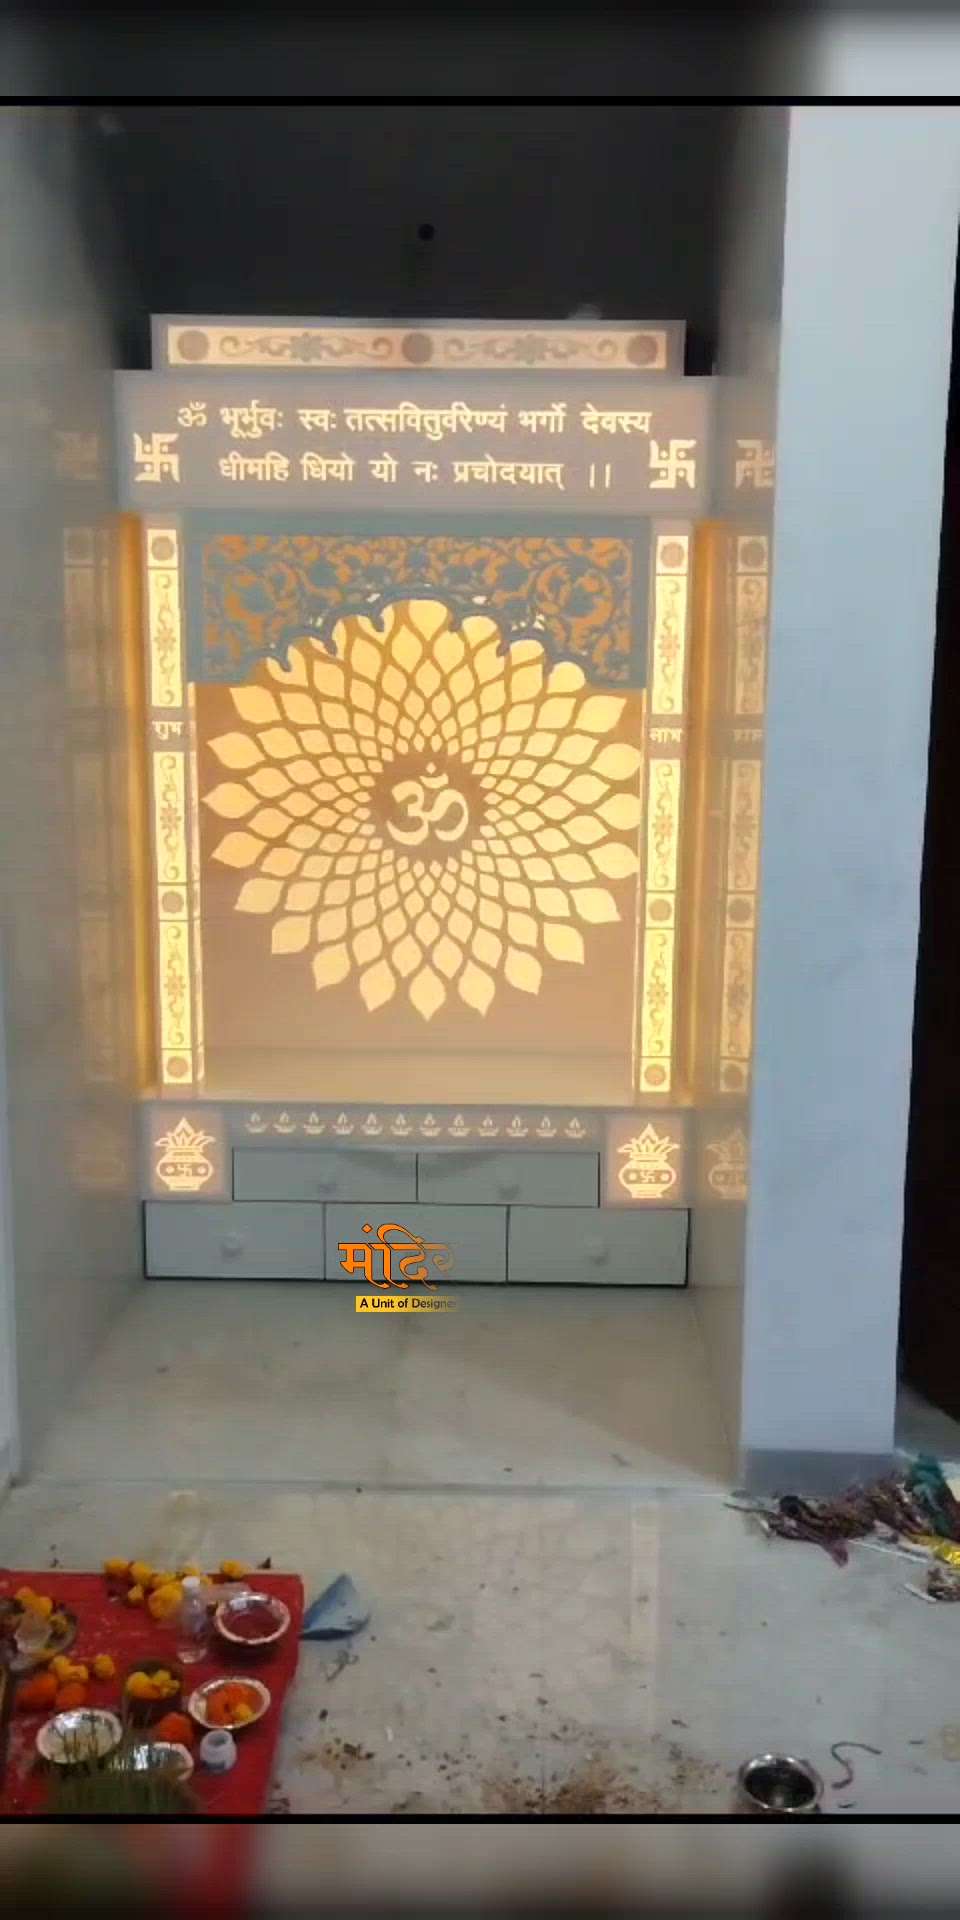 Latest Fully Customised Pooja Mandir Design by Mandir Interiors.
🛕

Mandir Interiors is the leading Customized Mandir/ Temple Manufacturer Brand based in Delhi, India. 

Contact us to have a Customized Pooja Room For Your Home, Office, Flat, Shop.

🌐 mandirinteriors.com 

📞 +91-8459798045

 #mandirdesign #templedoor #templedesign #mandirbackwall #mandiridea #mandircnc #Poojaroom #templedesign #temples #templework